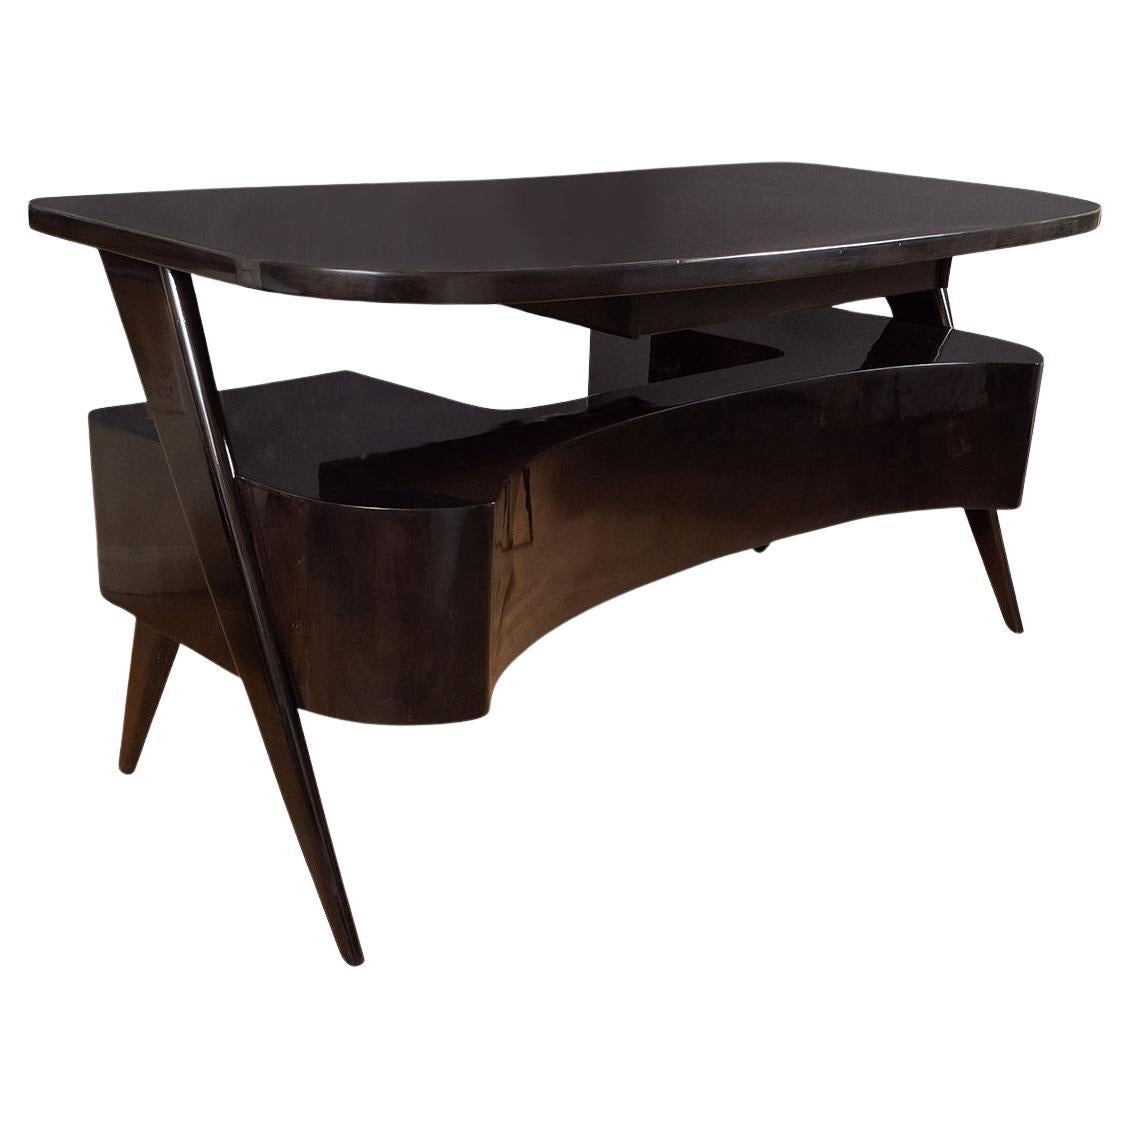 Modernist lacquered wood executive desk